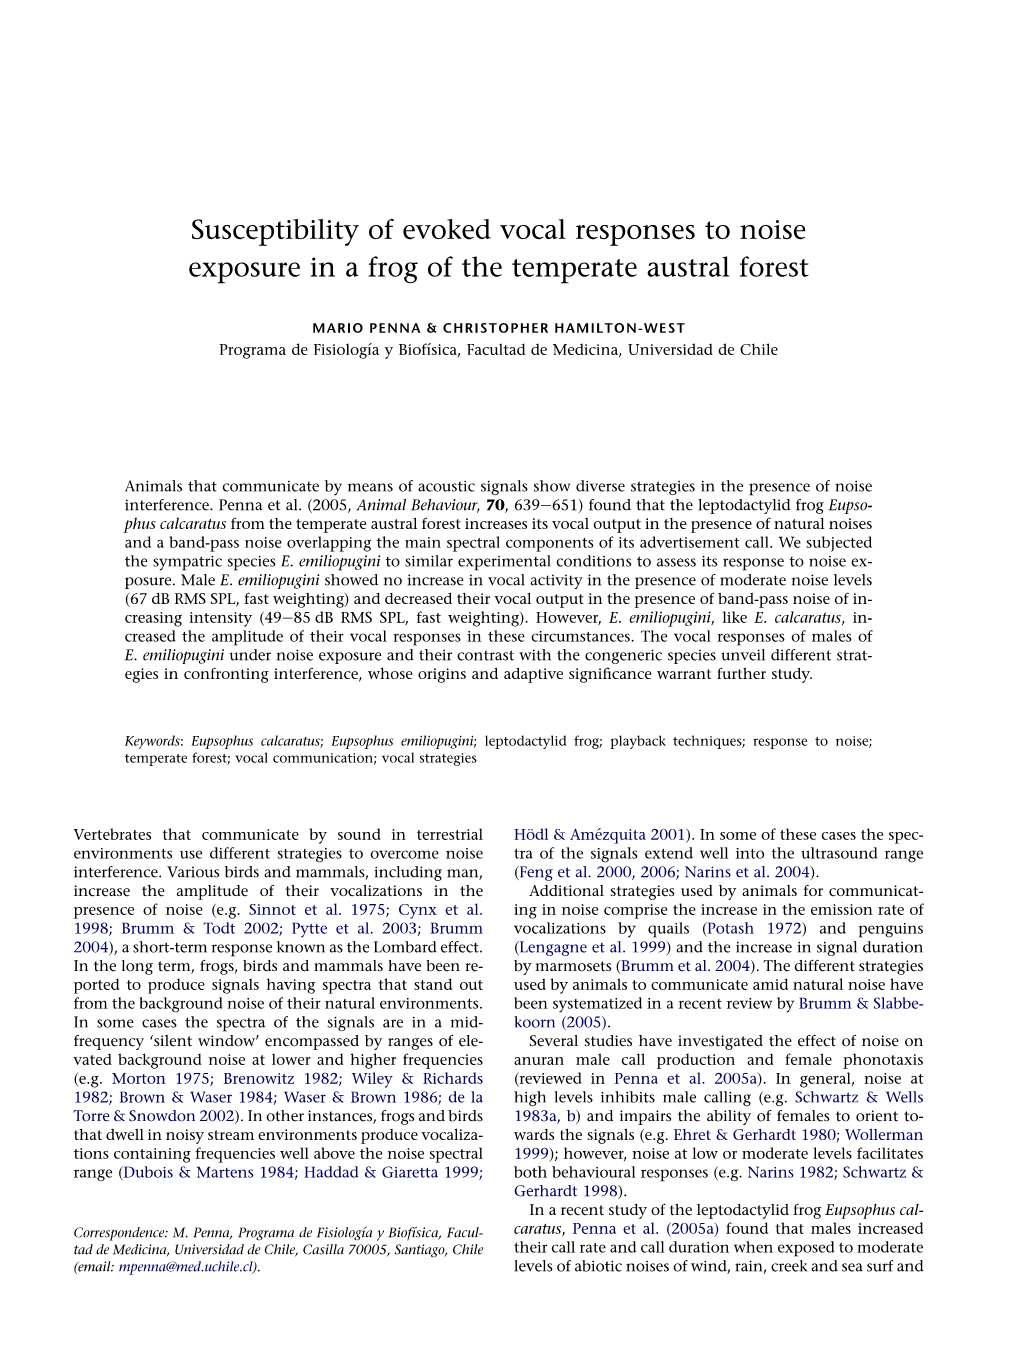 Susceptibility of Evoked Vocal Responses to Noise Exposure in a Frog of the Temperate Austral Forest